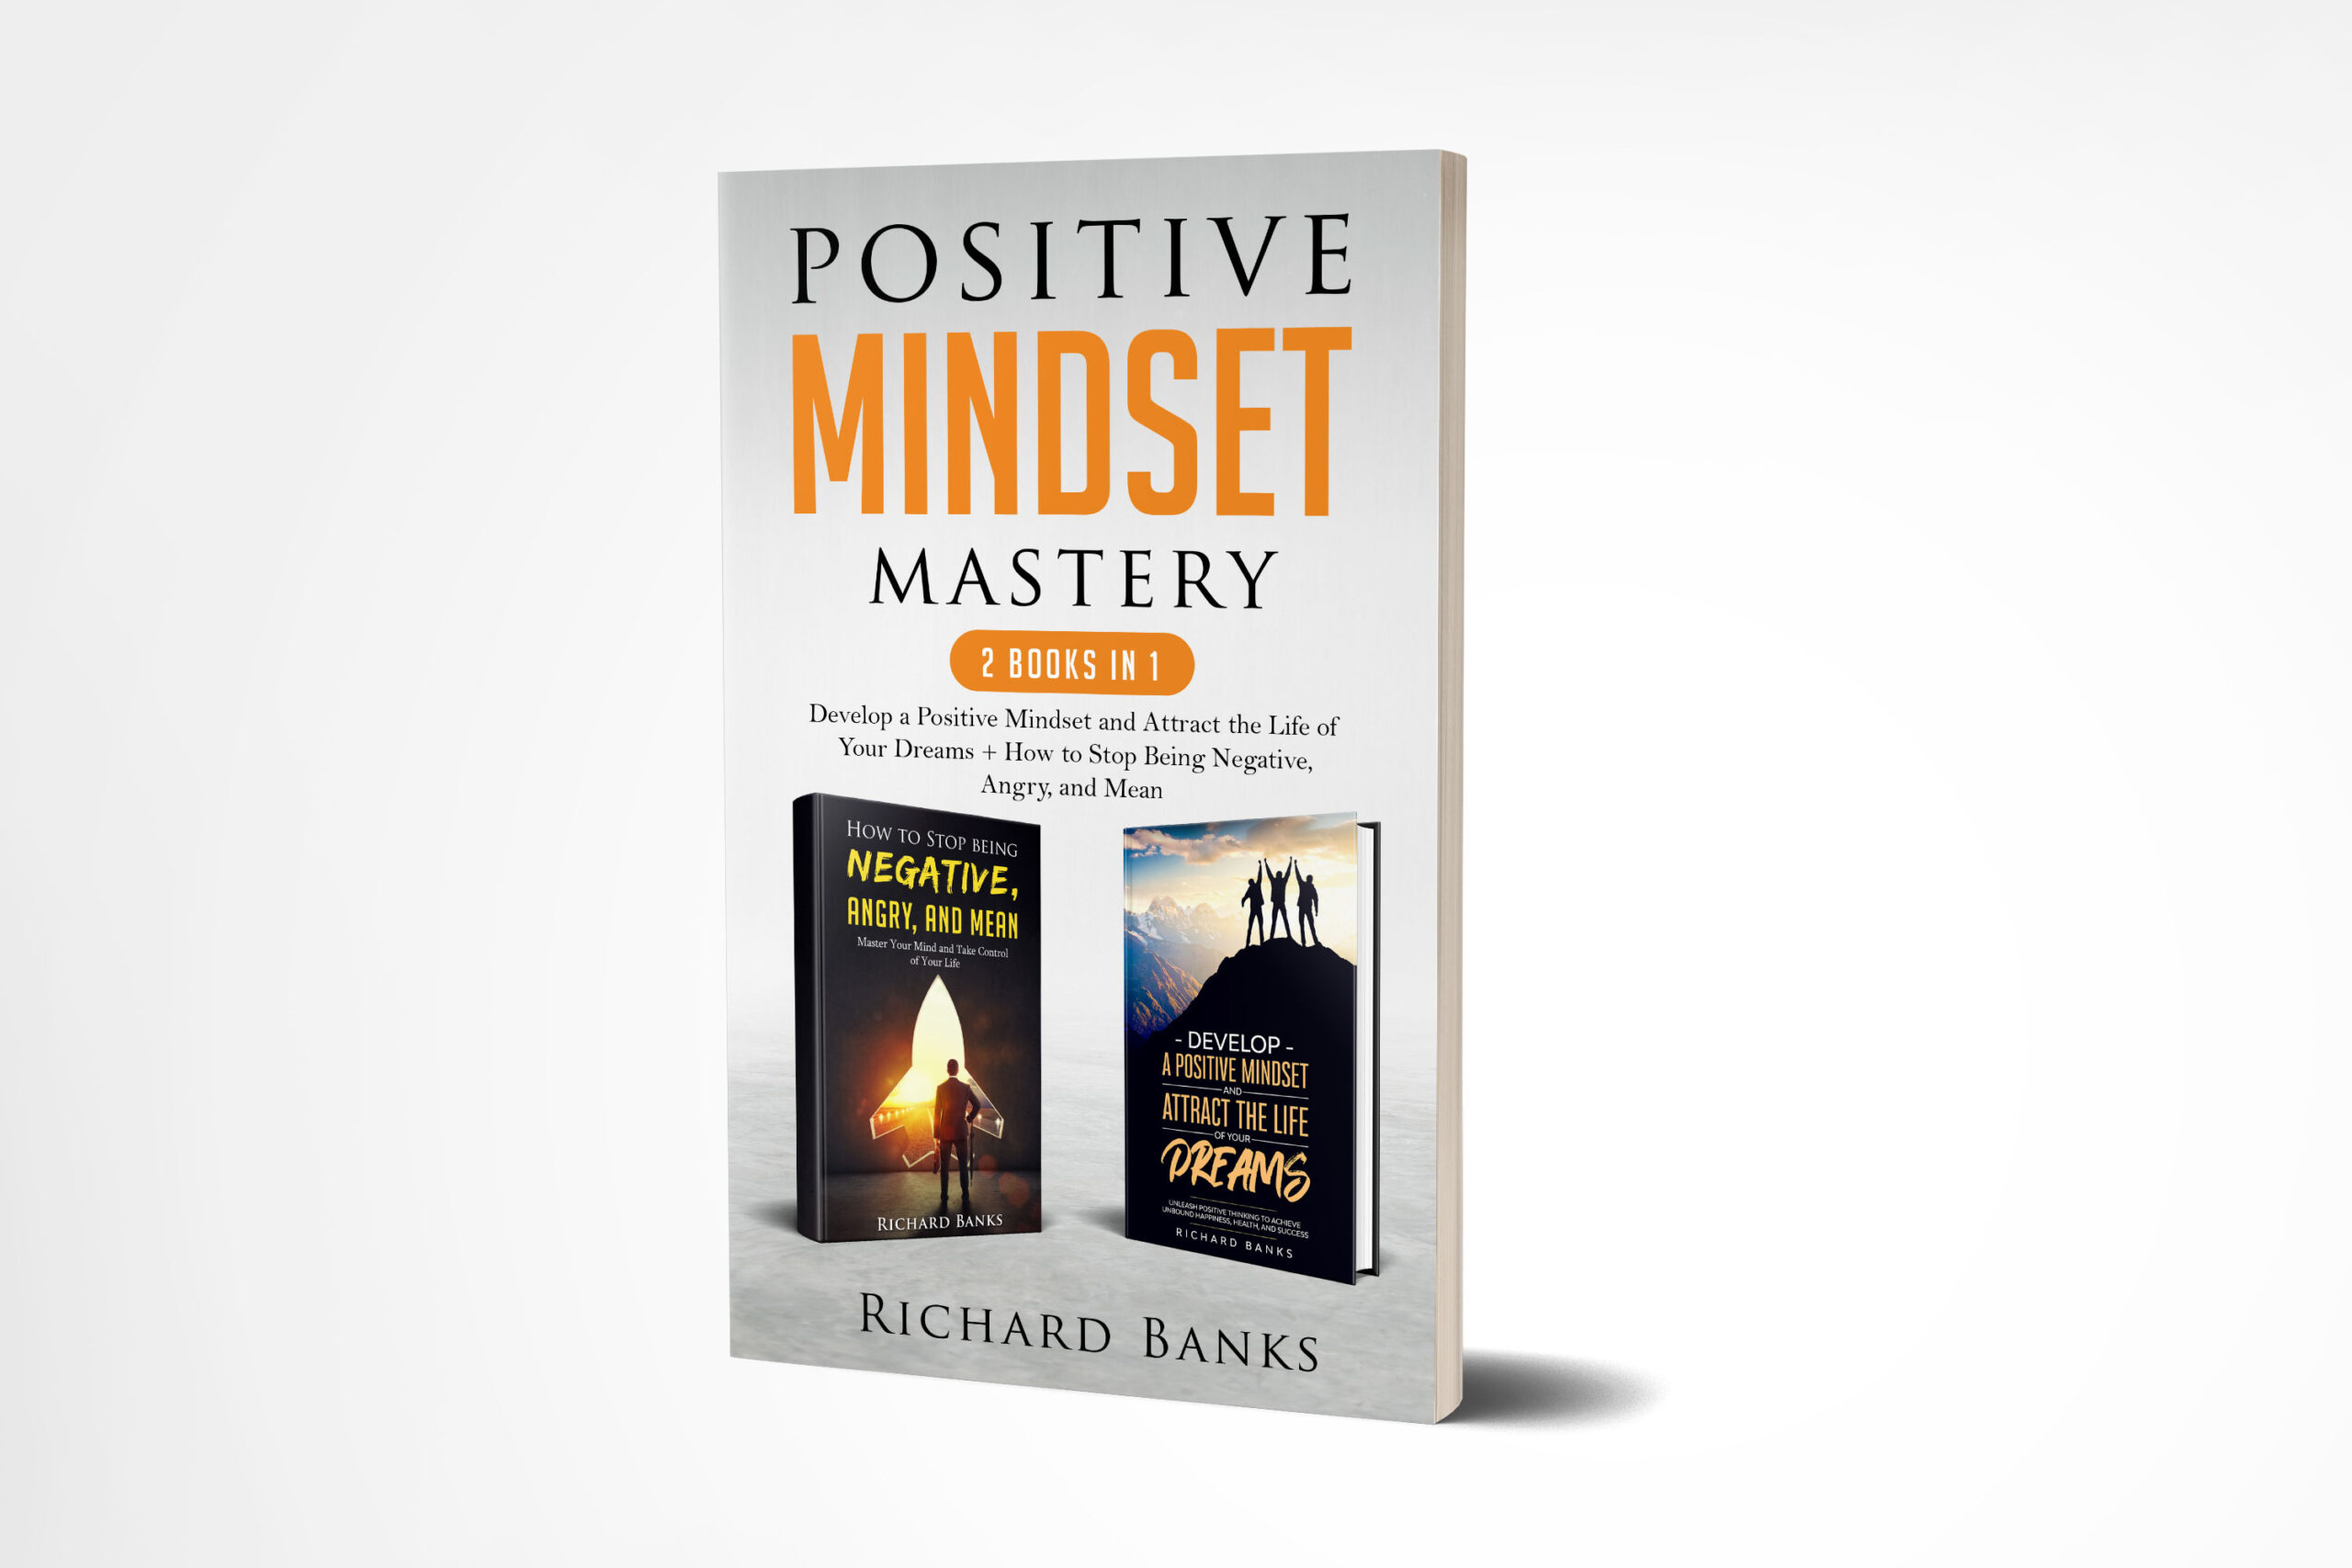 FREE: Positive Mindset Mastery 2 Books in 1: Develop a Positive Mindset and Attract the Life of Your Dreams + How to Stop Being Negative, Angry, and Mean by Richard Banks